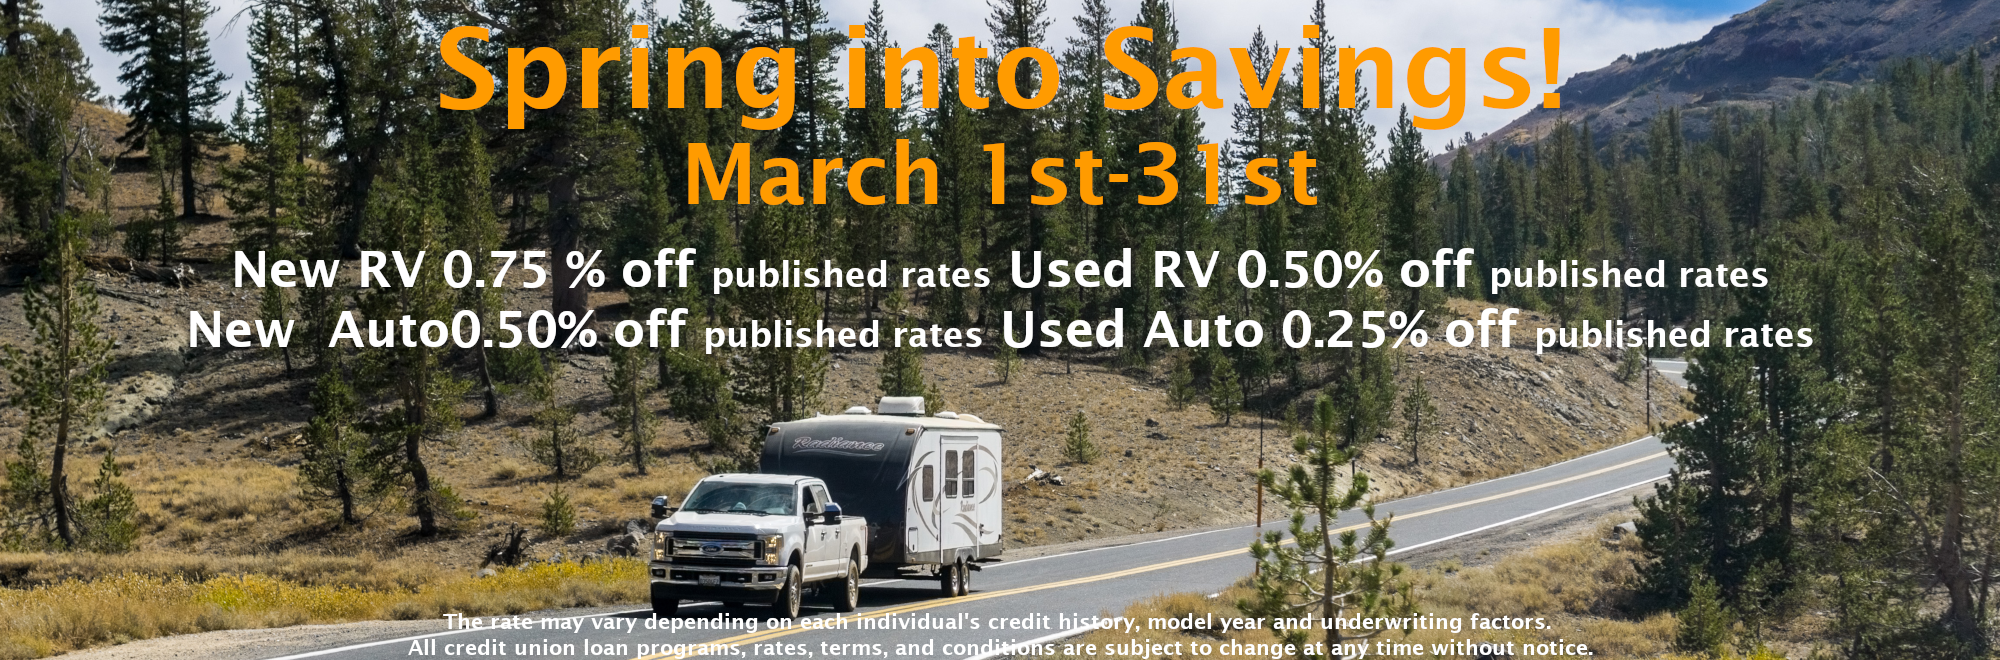 Spring into Savings! New RV 0.75 % off published rates Used RV 0.50% off published rates New Auto0.50% off published rates Used Auto 0.25% off published rates The rate may vary depending on each individual's credit history, model year and underwriting factors. All credit union loan programs, rates, terms, and conditions are subject to change at any time without notice.